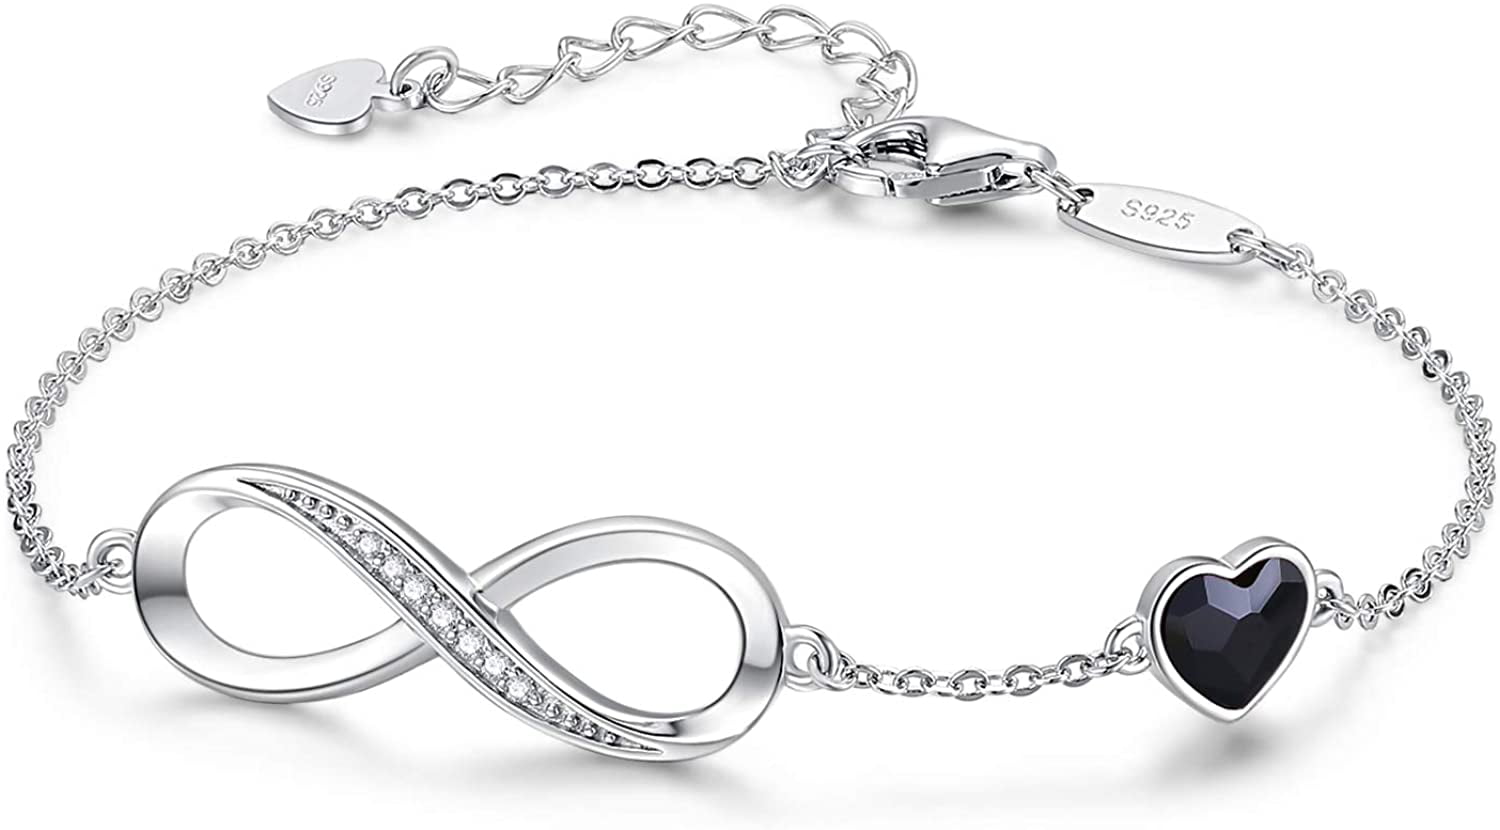 ONE A DAY Women Adjustable Bracelet 925 Silver with Crystals Ball Elegant Jewellery Gift